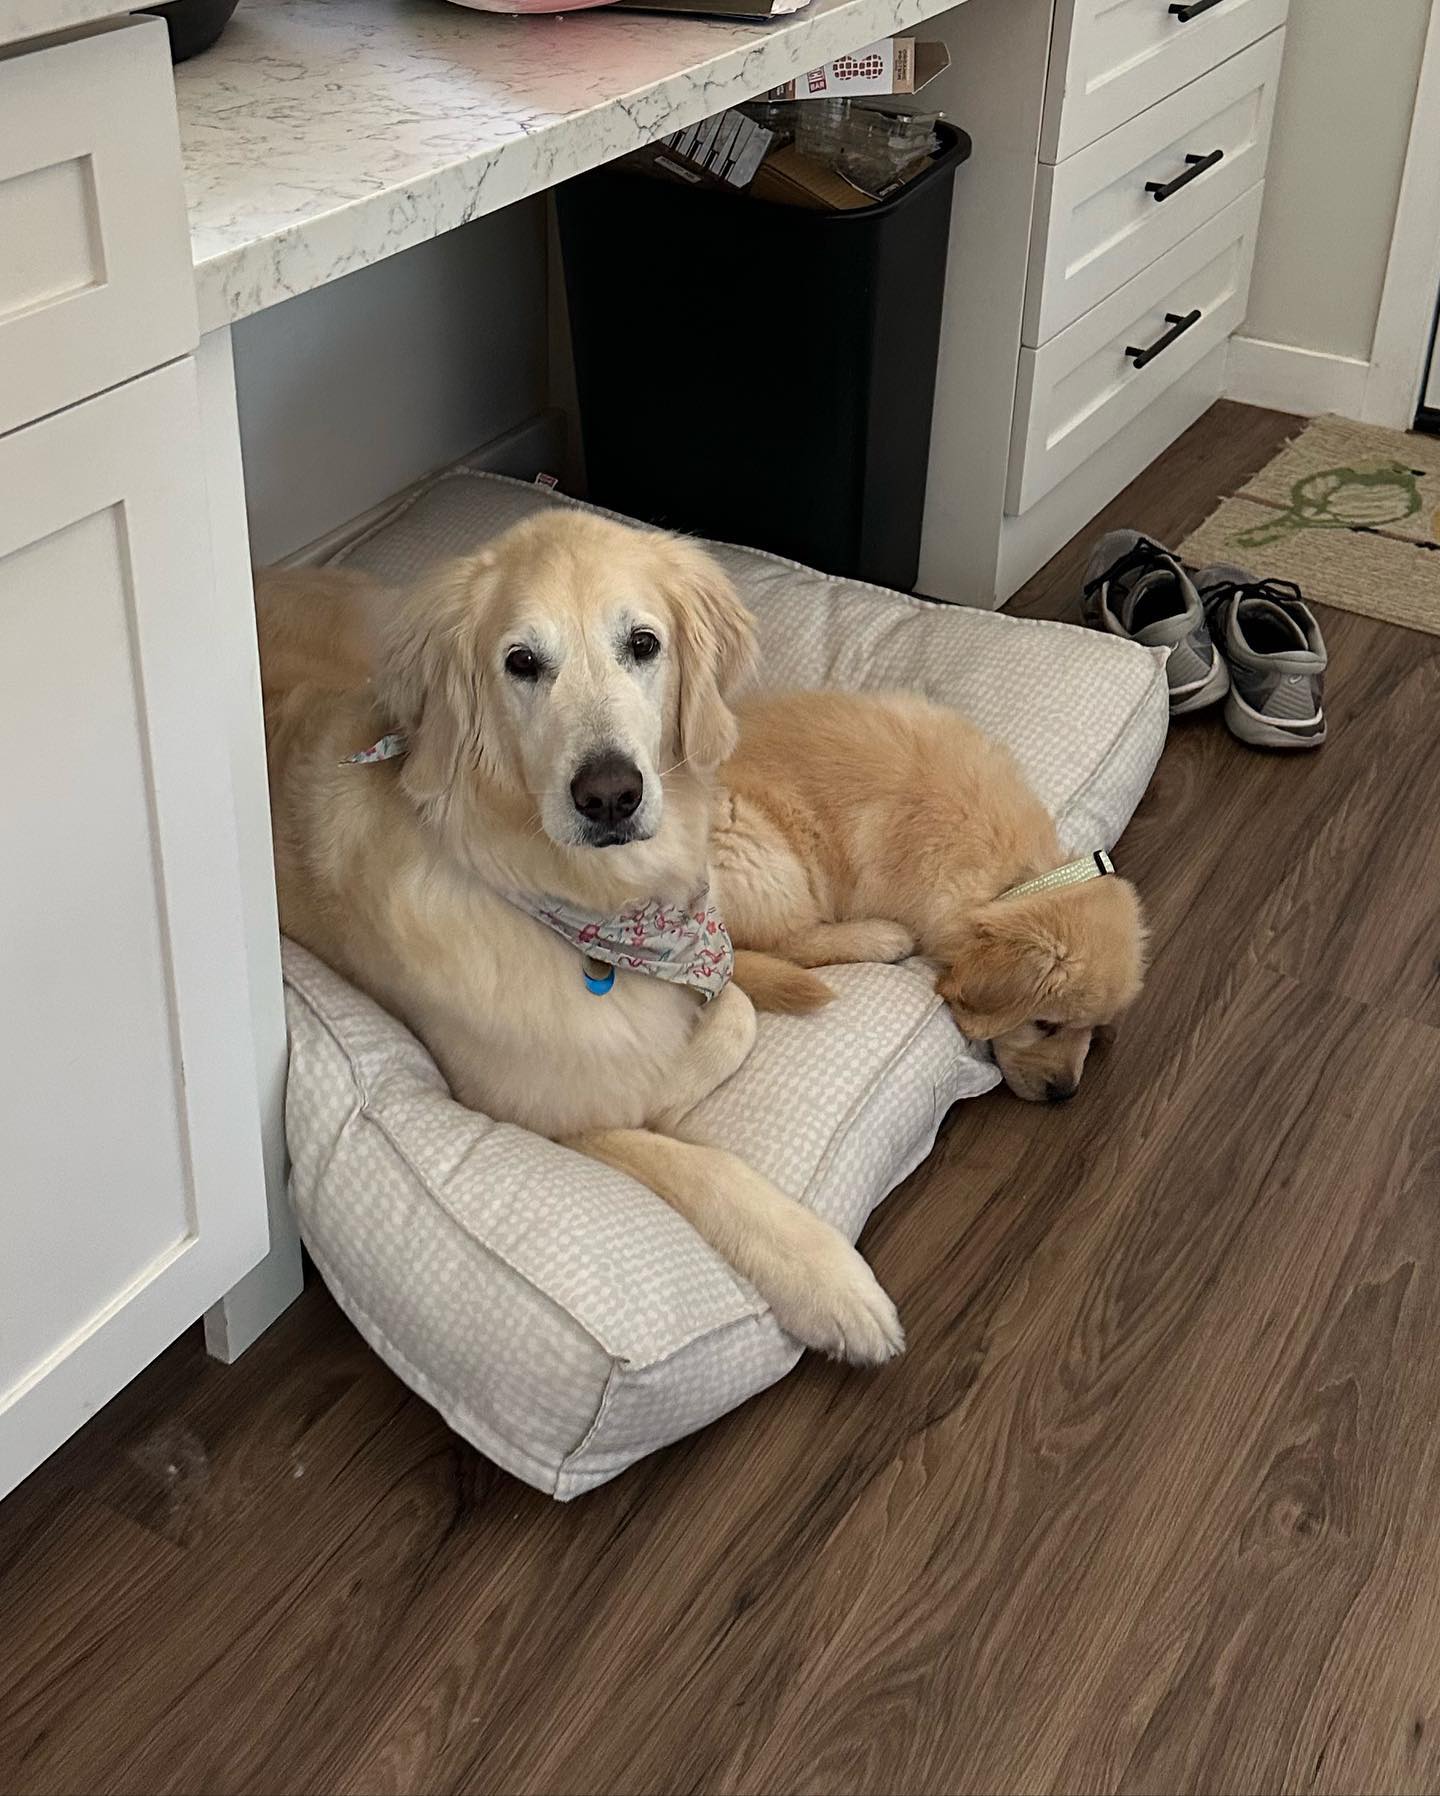 Adult and puppy golden retriever on a dog bed together.